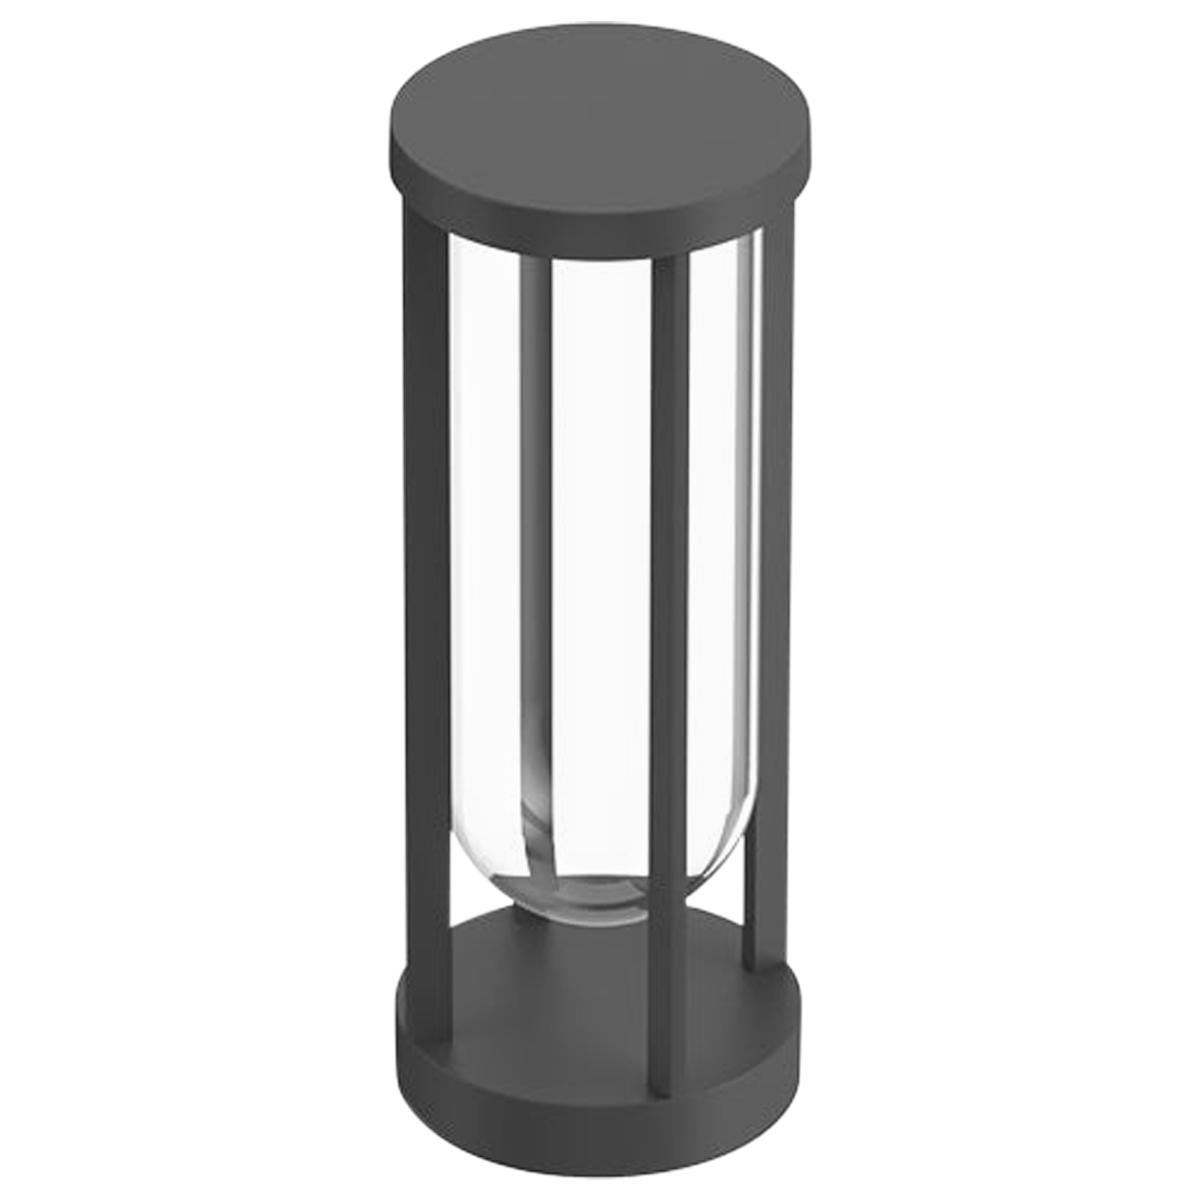 Flos In Vitro Bollard 1 2700K LED Floor Lamp in Anthracite by Philippe Starck For Sale